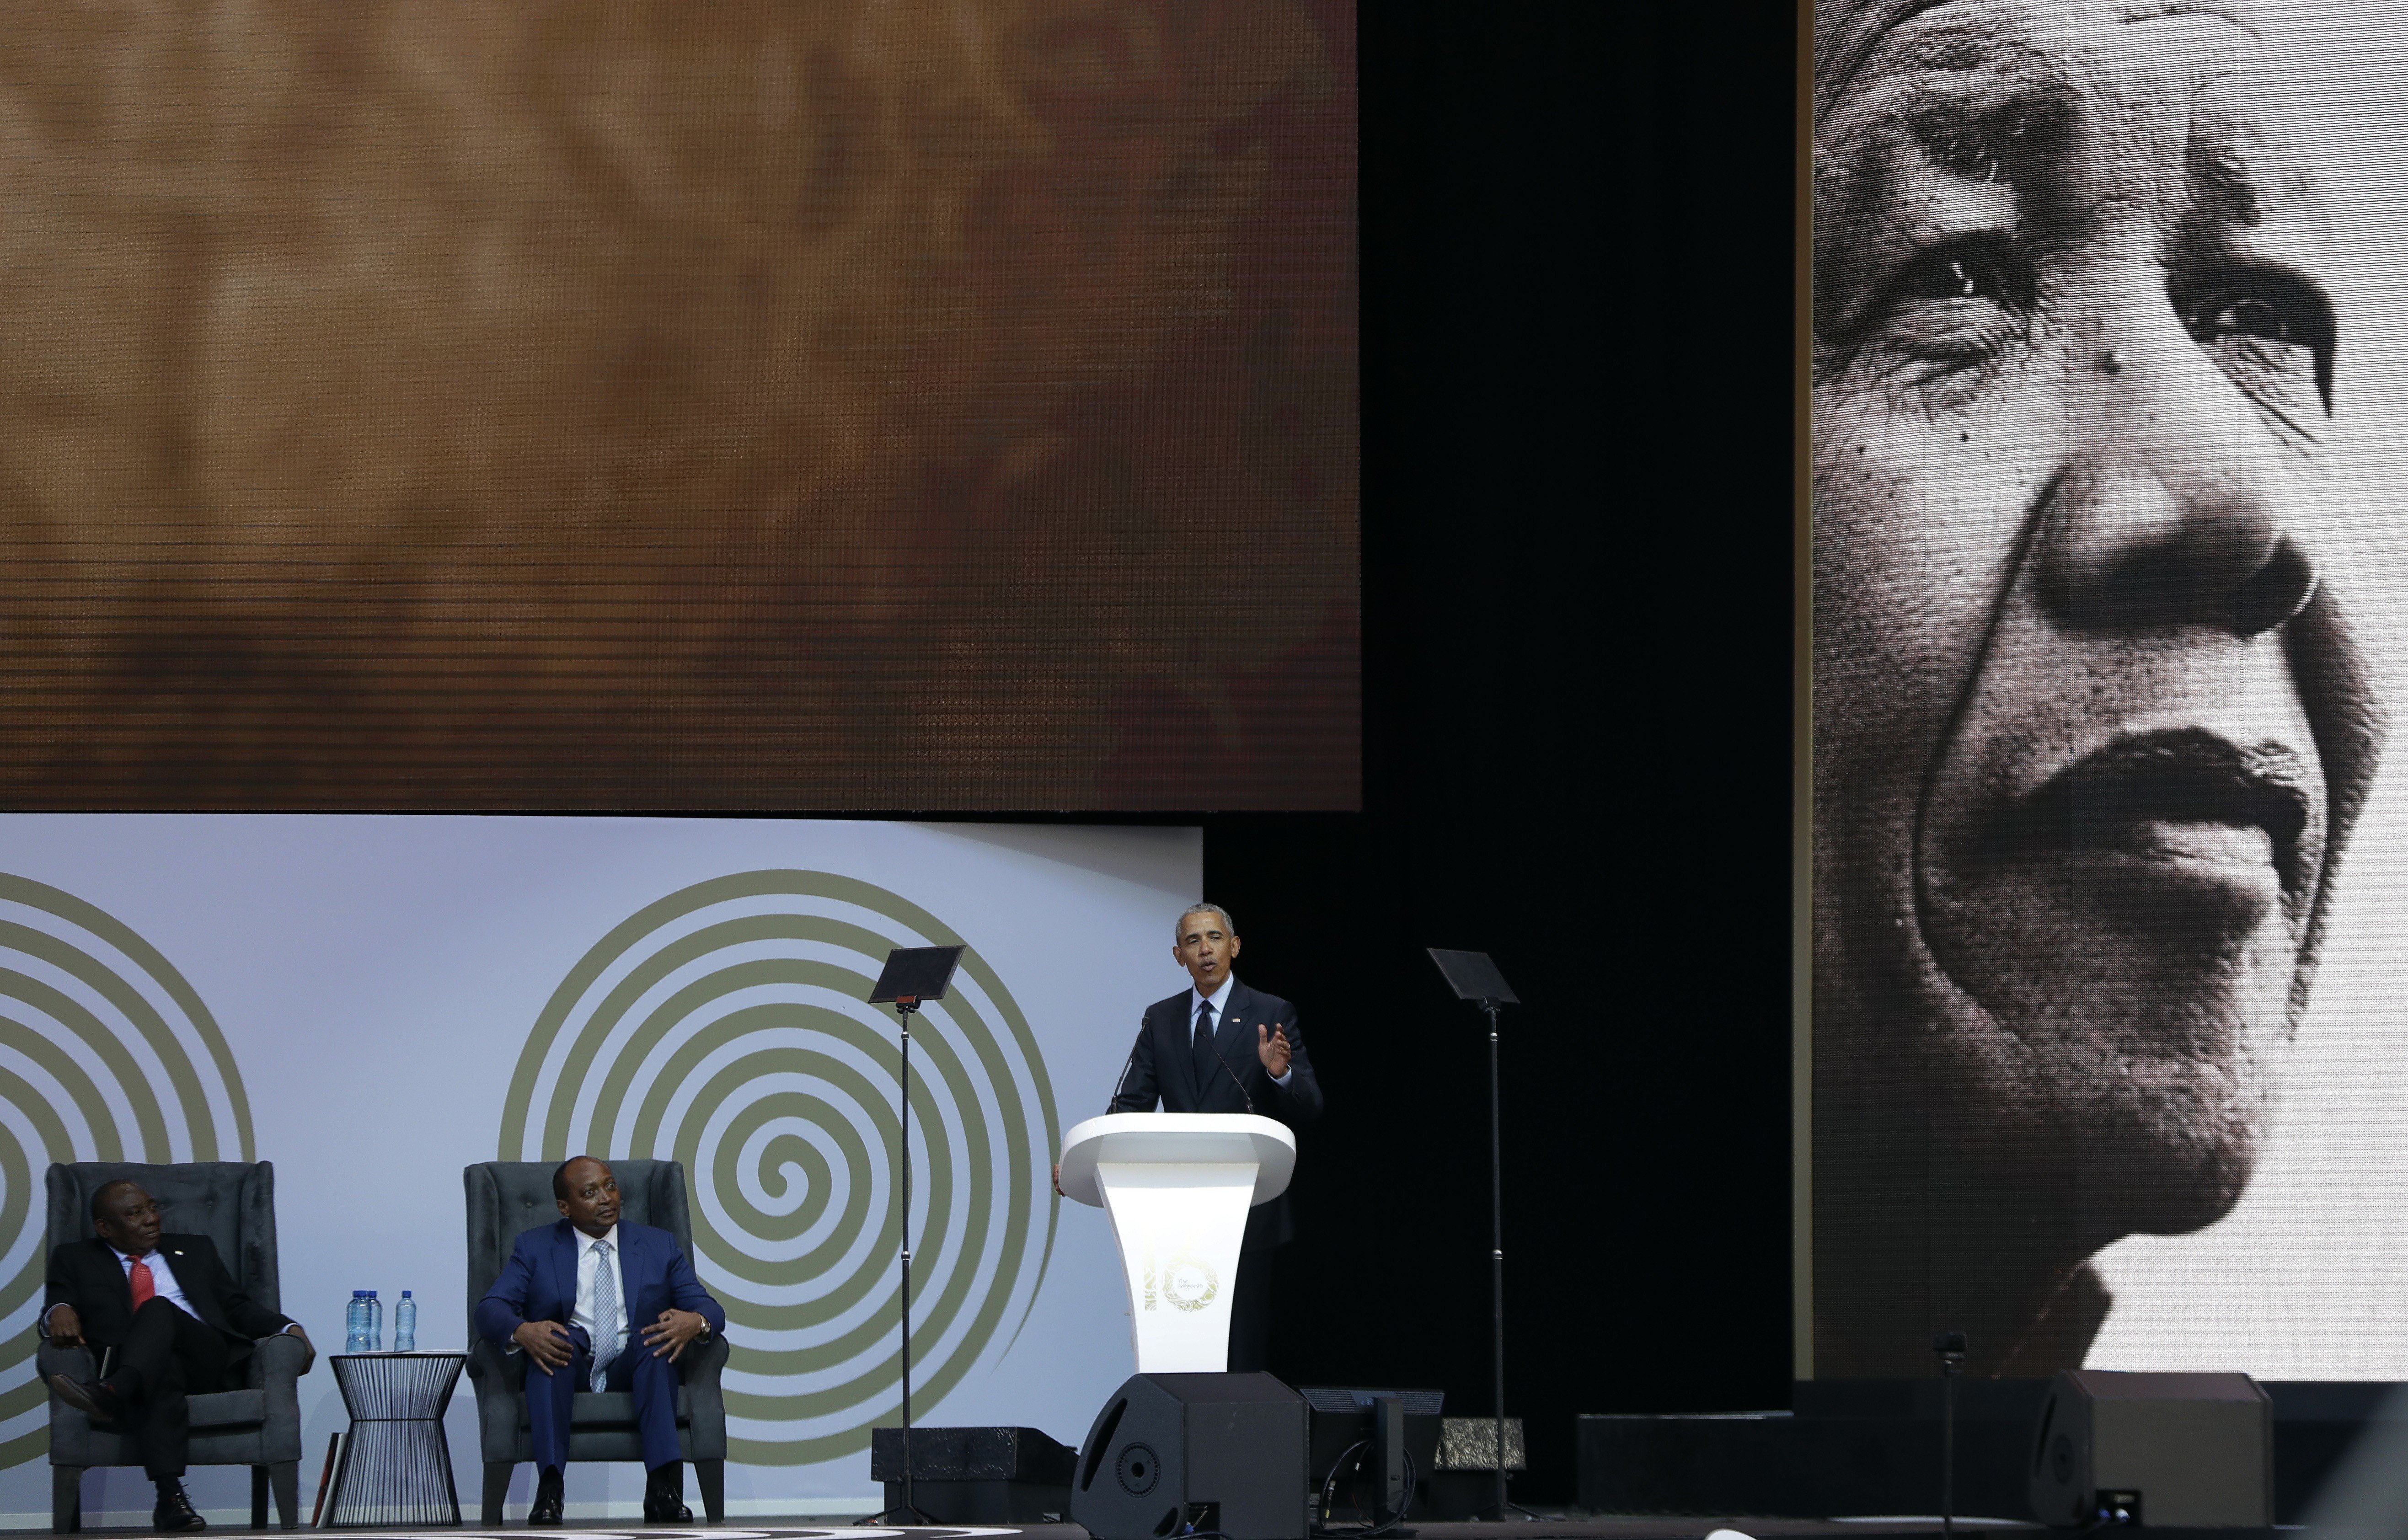 Former US President Barack Obama delivers the 16th Annual Nelson Mandela Lecture, at the Wanderers Stadium in Johannesburg, South Africa, on July 17. In his highest-profile speech since leaving office, Obama urged people around the world to respect human rights and other values under threat, in an address marking the 100th anniversary of anti-apartheid leader Mandela’s birth. Photo: AP